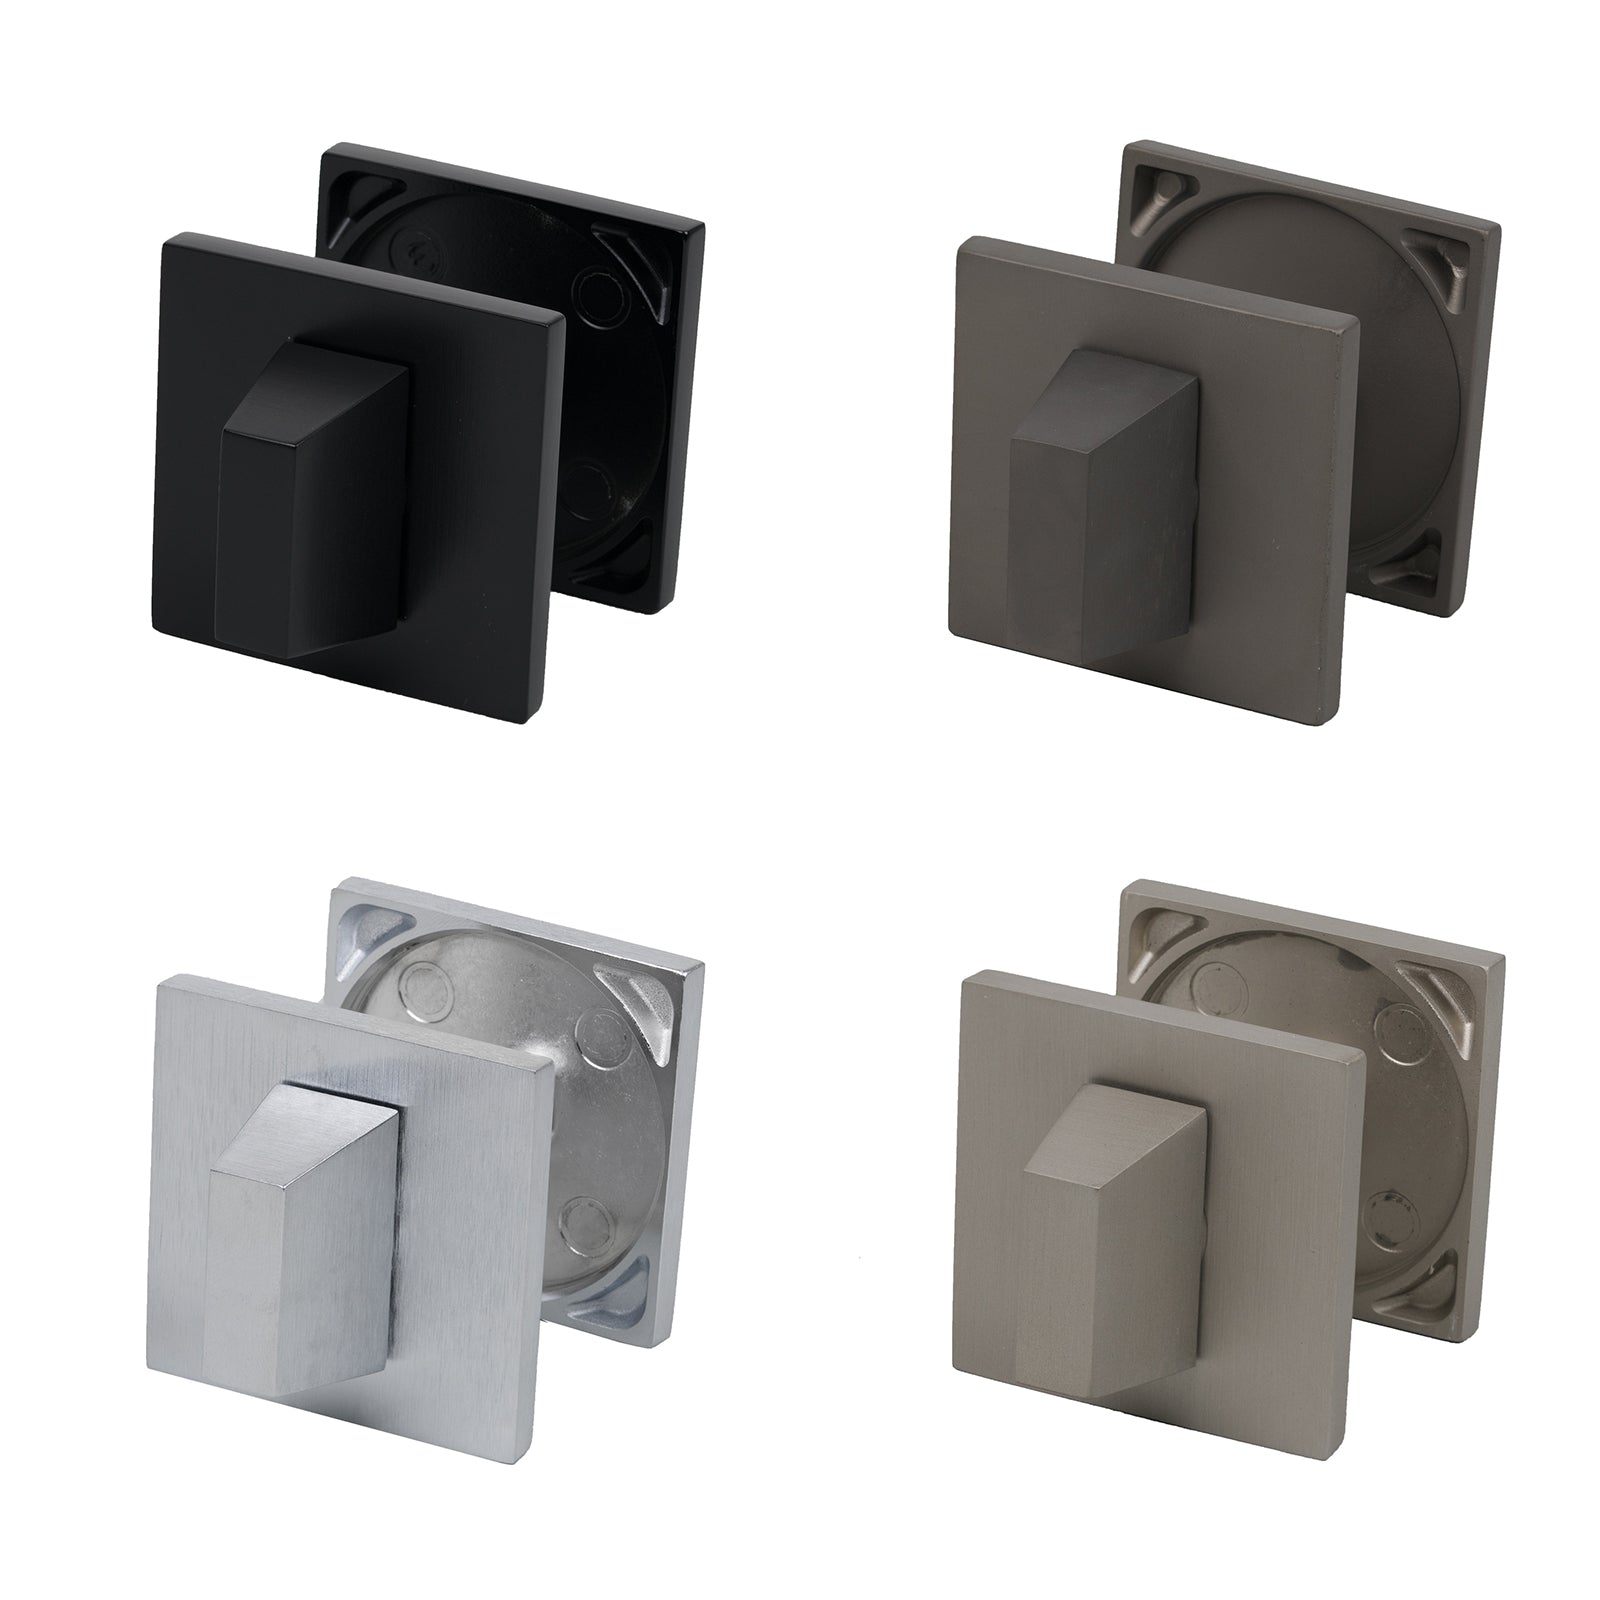 Tupai square rose bathroom turn and release, in four finishes, Nickel Pearl, Black Pearl, Satin Chrome, and Titan.